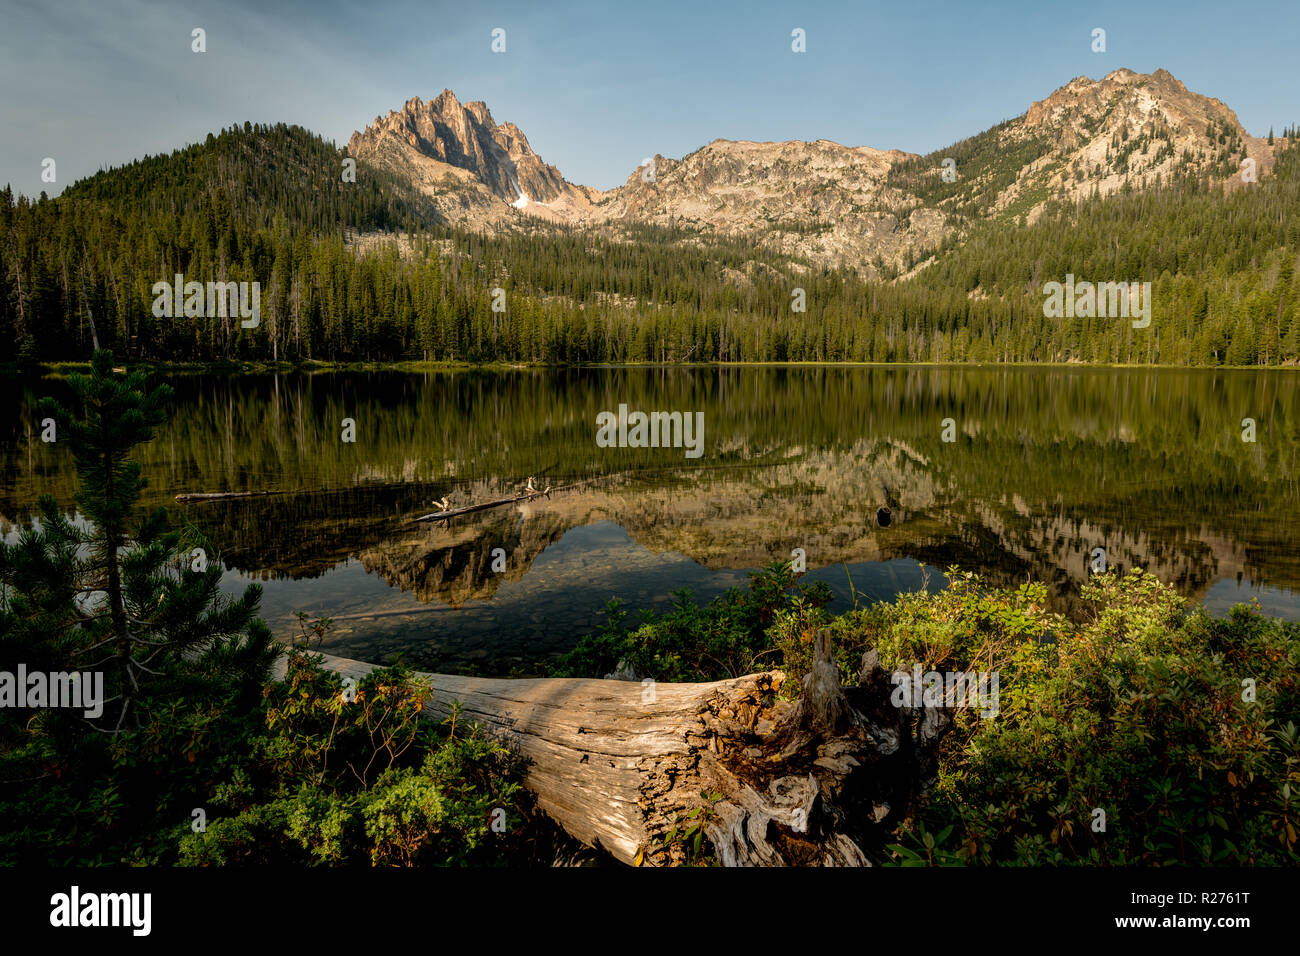 Mountain lake with forest reflection and distant peaks Stock Photo